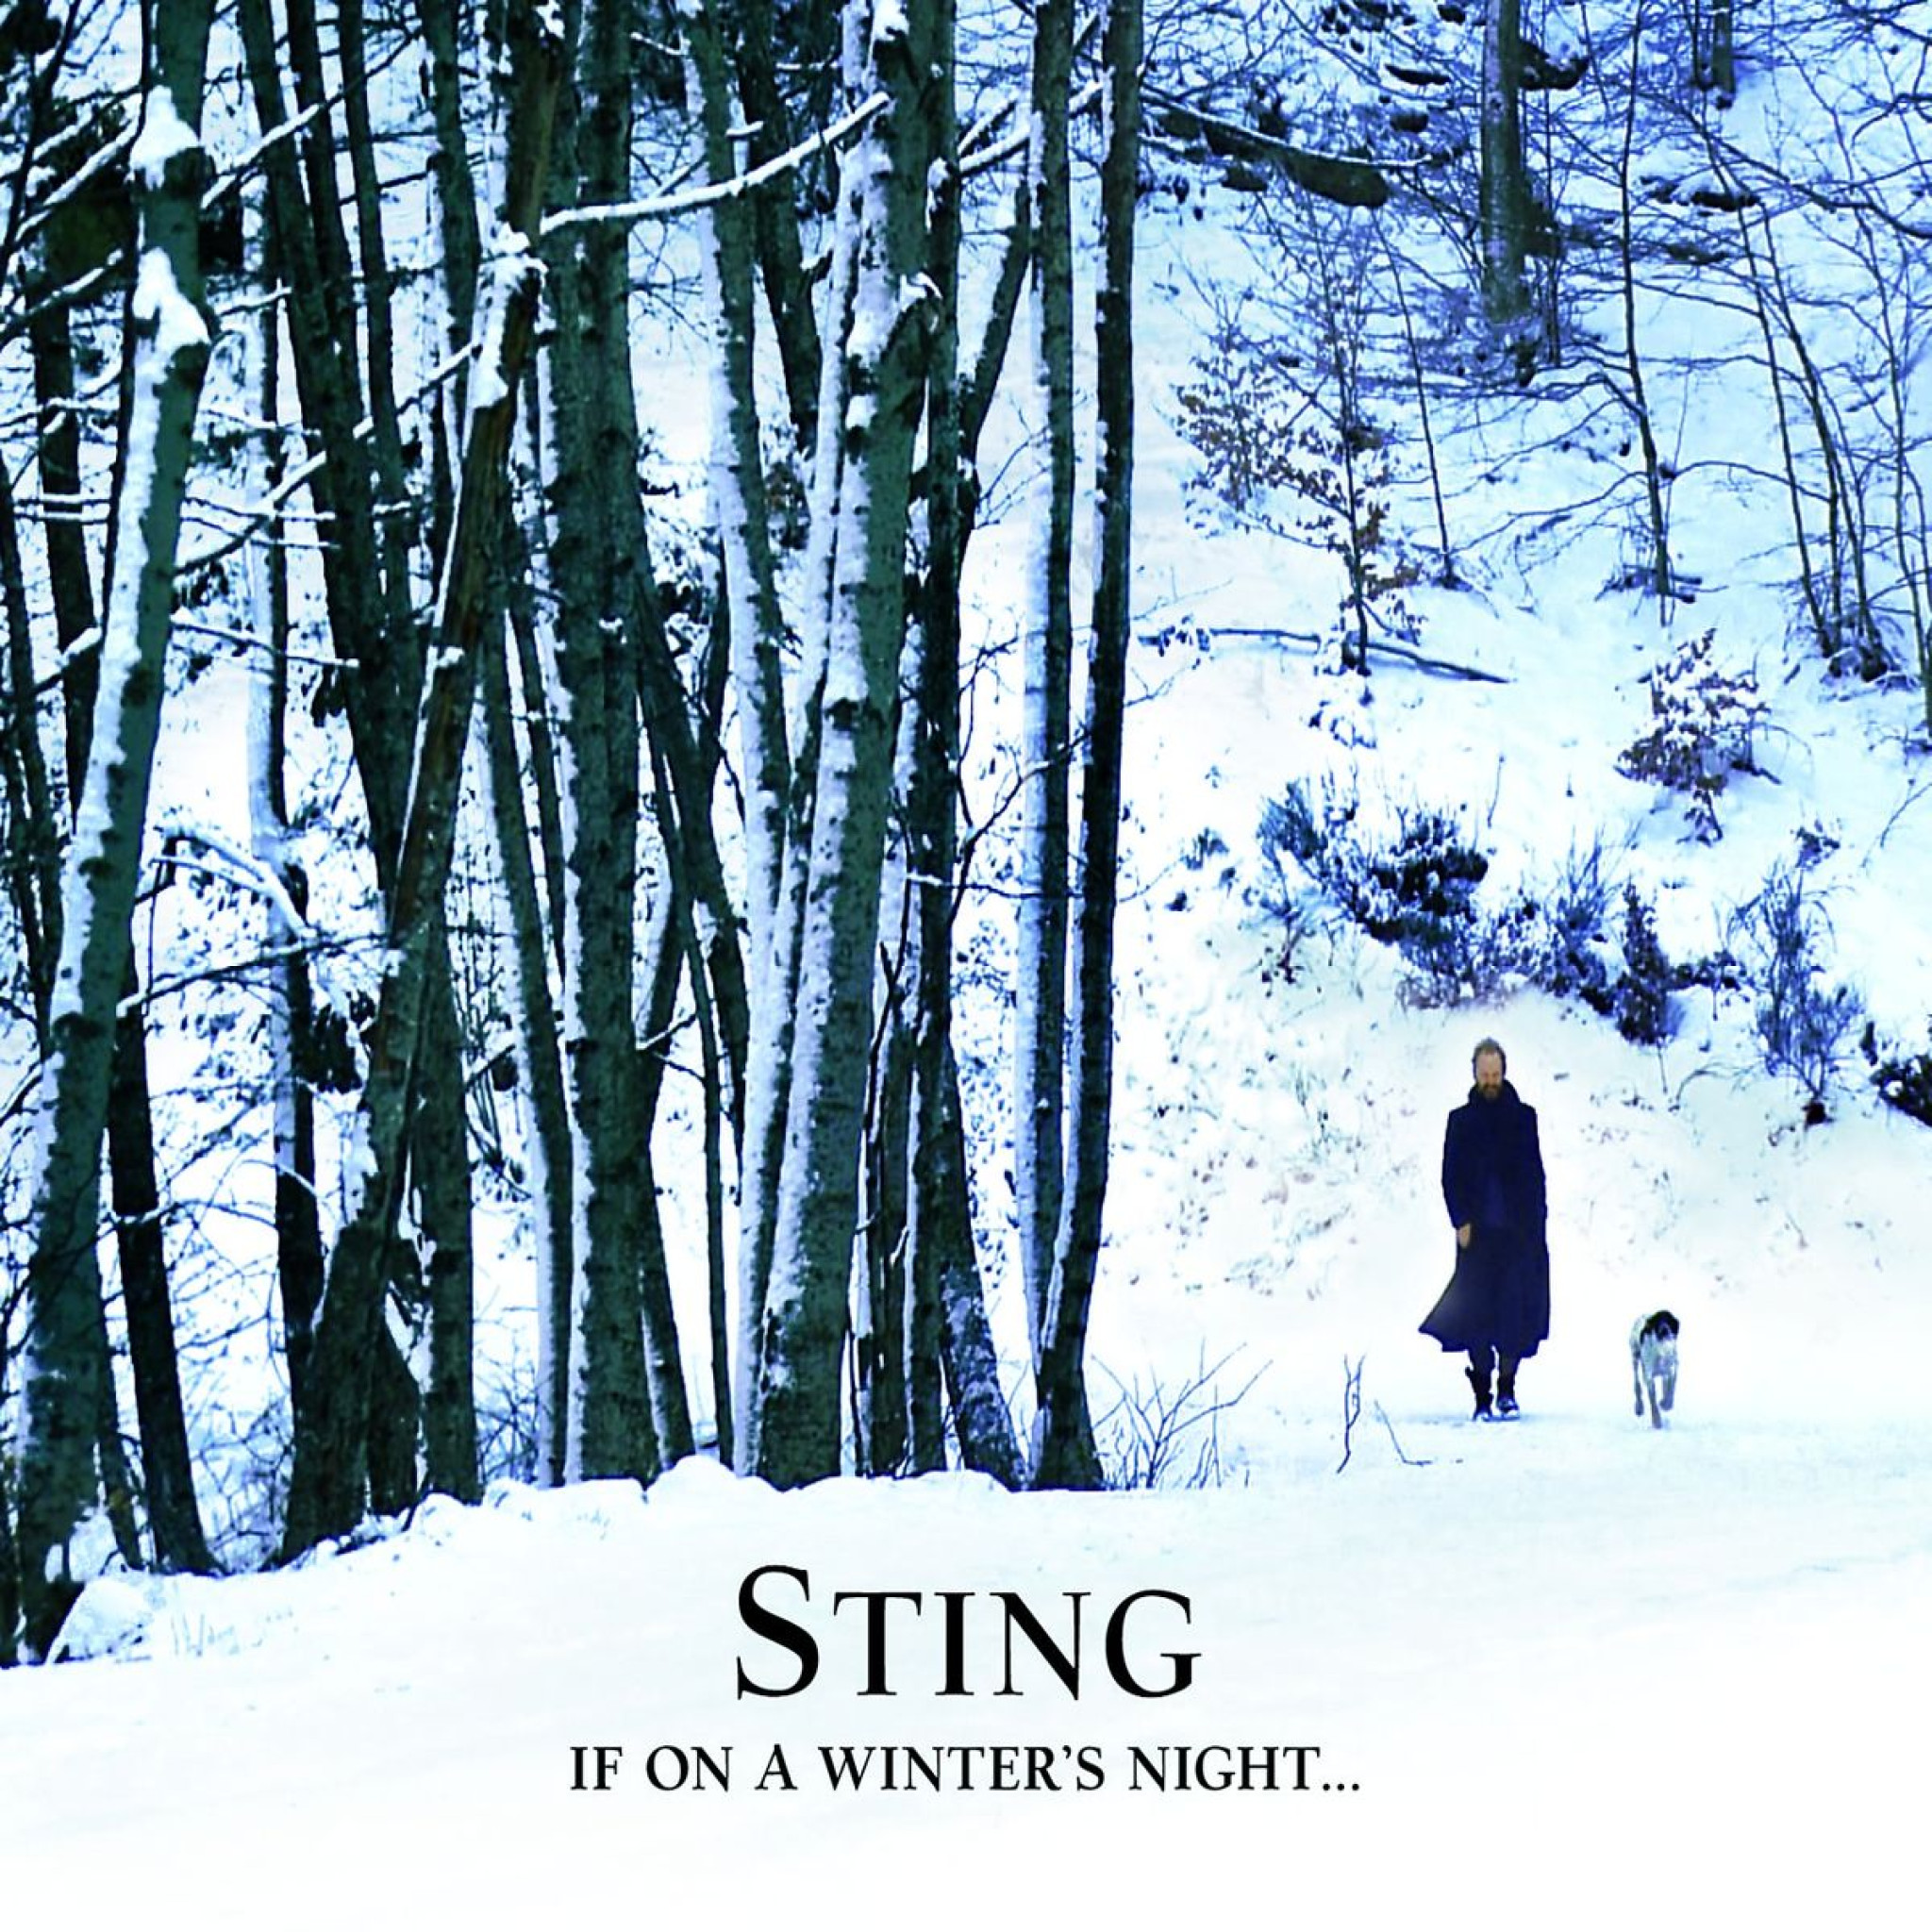 If on a winter's night: Sting